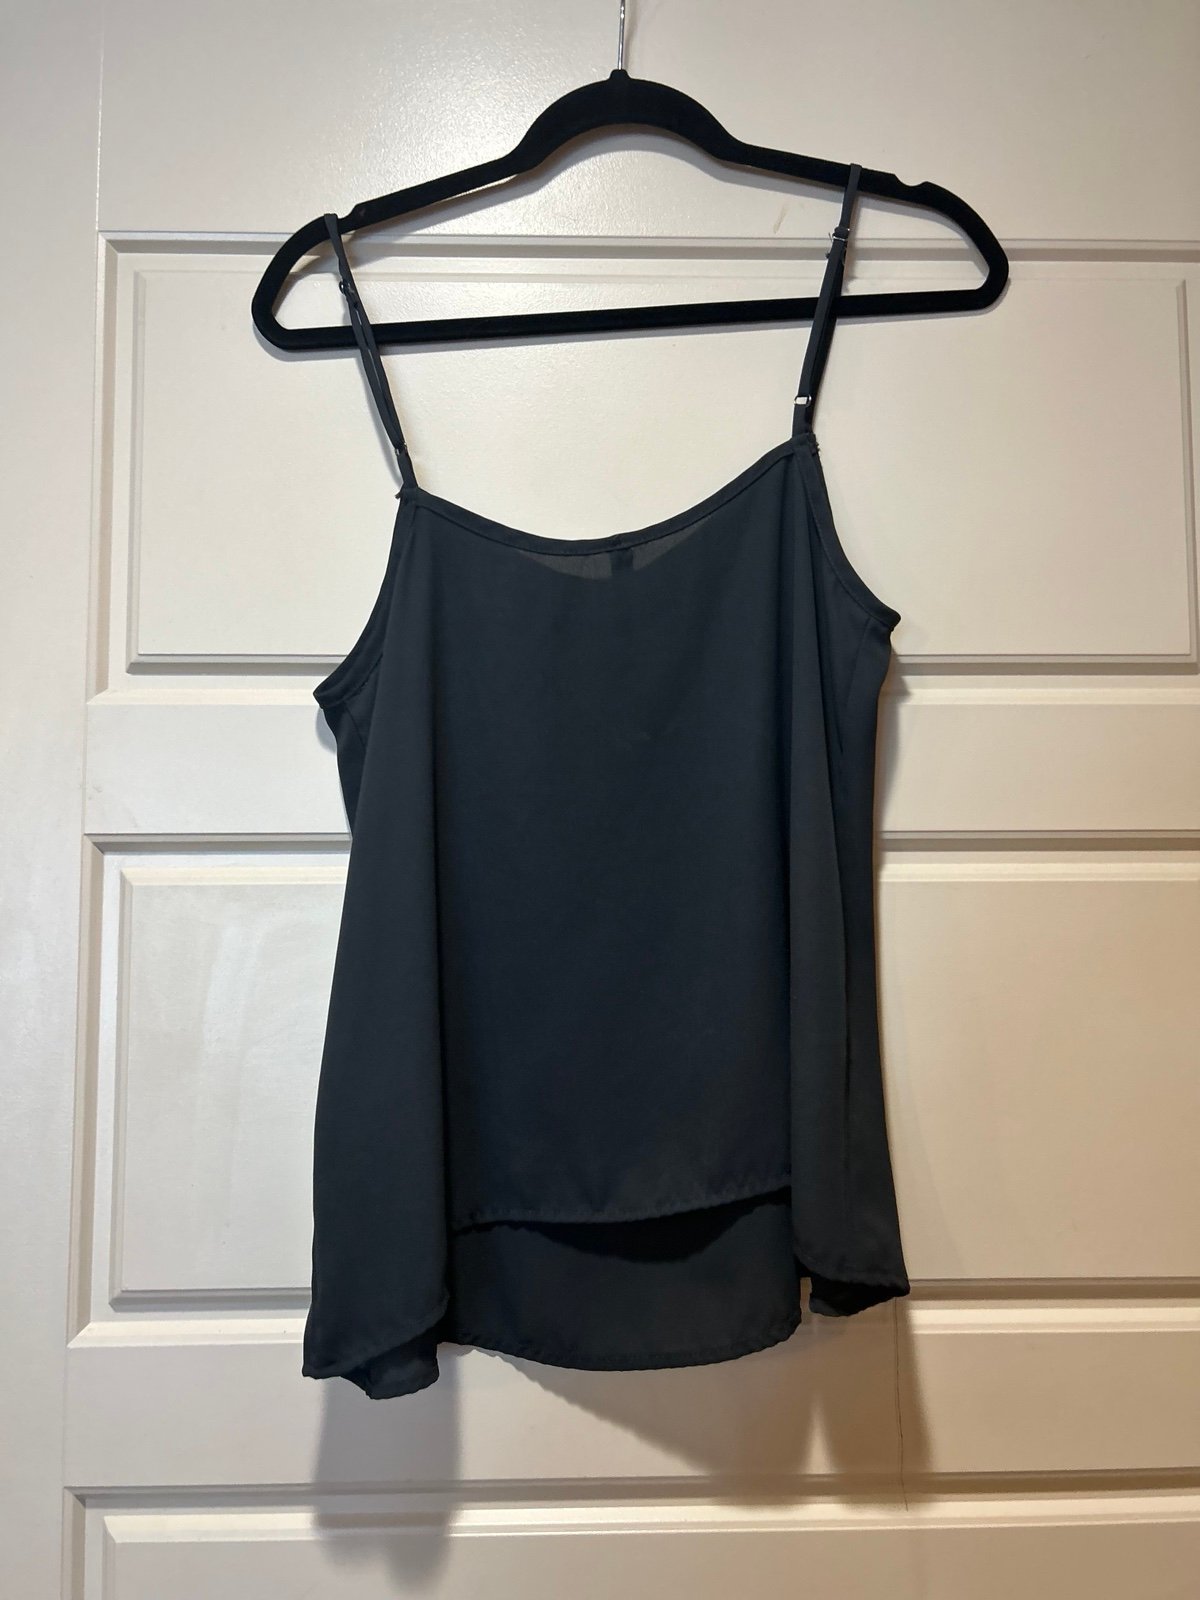 Beautiful Alison Joy Evereve Charcoal Gray Tank Medium  Adjustable straps G7Y81hOQL all for you